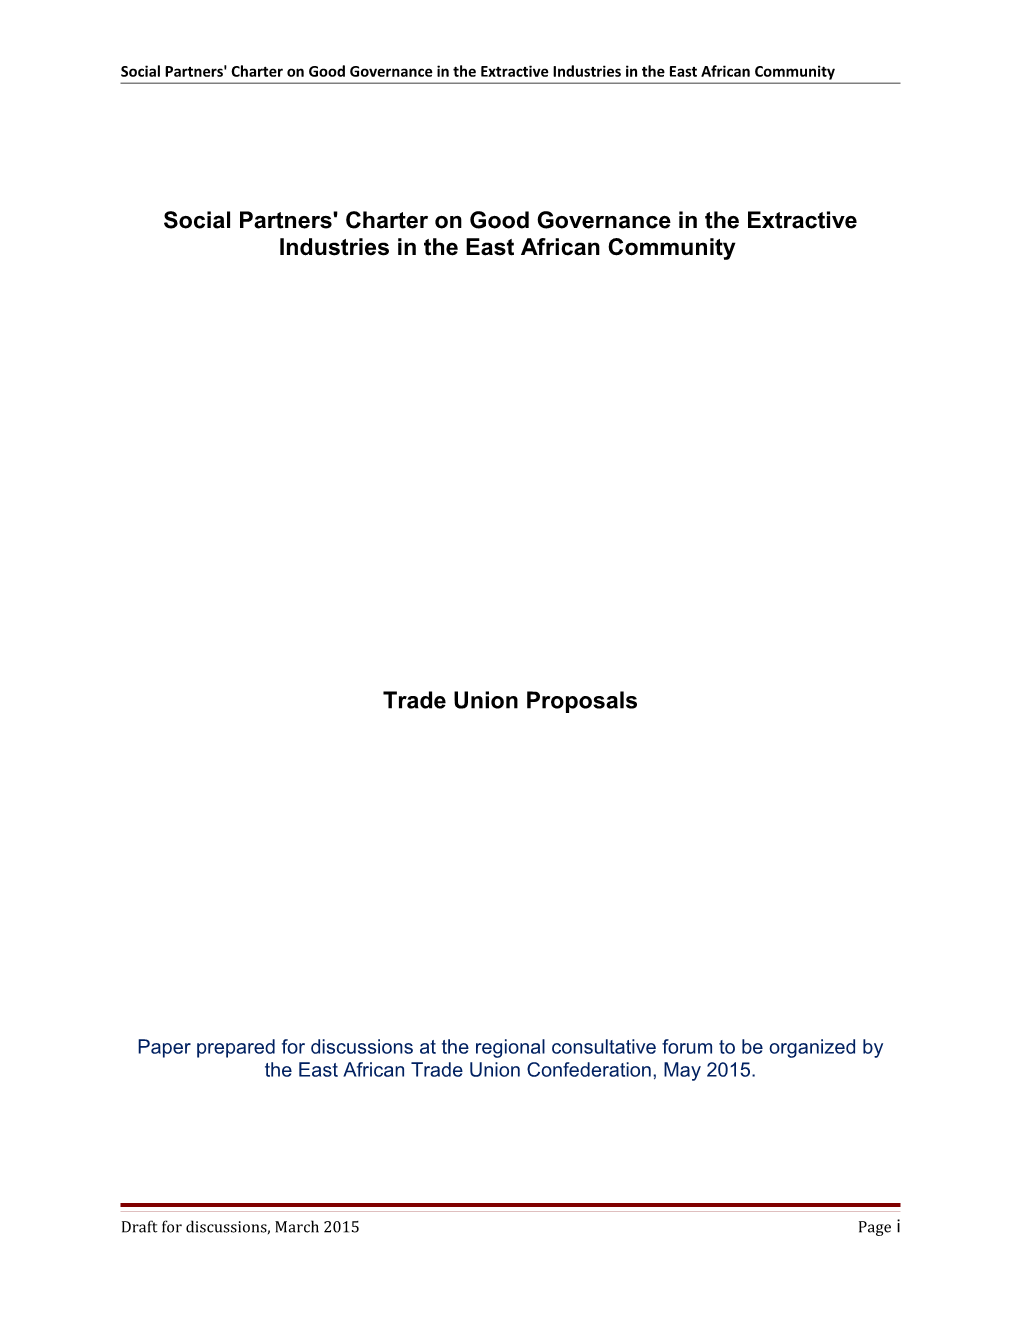 Social Partners' Charter on Good Governance in the Extractive Industries in the East African